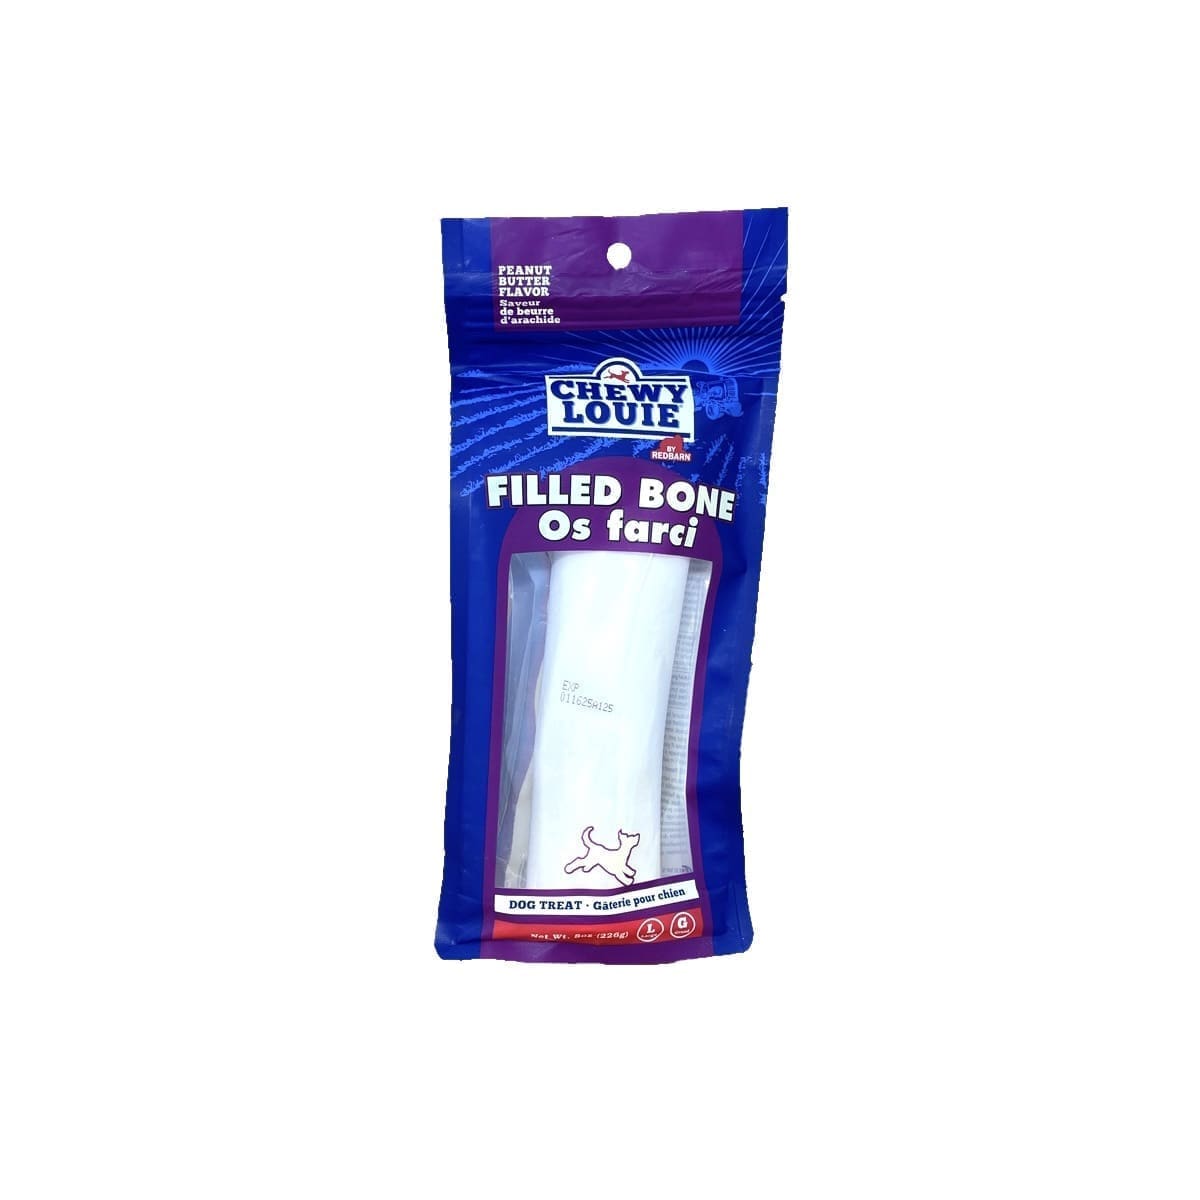 Chewy Louie Peanut Butter Filled Bone Large (226g)